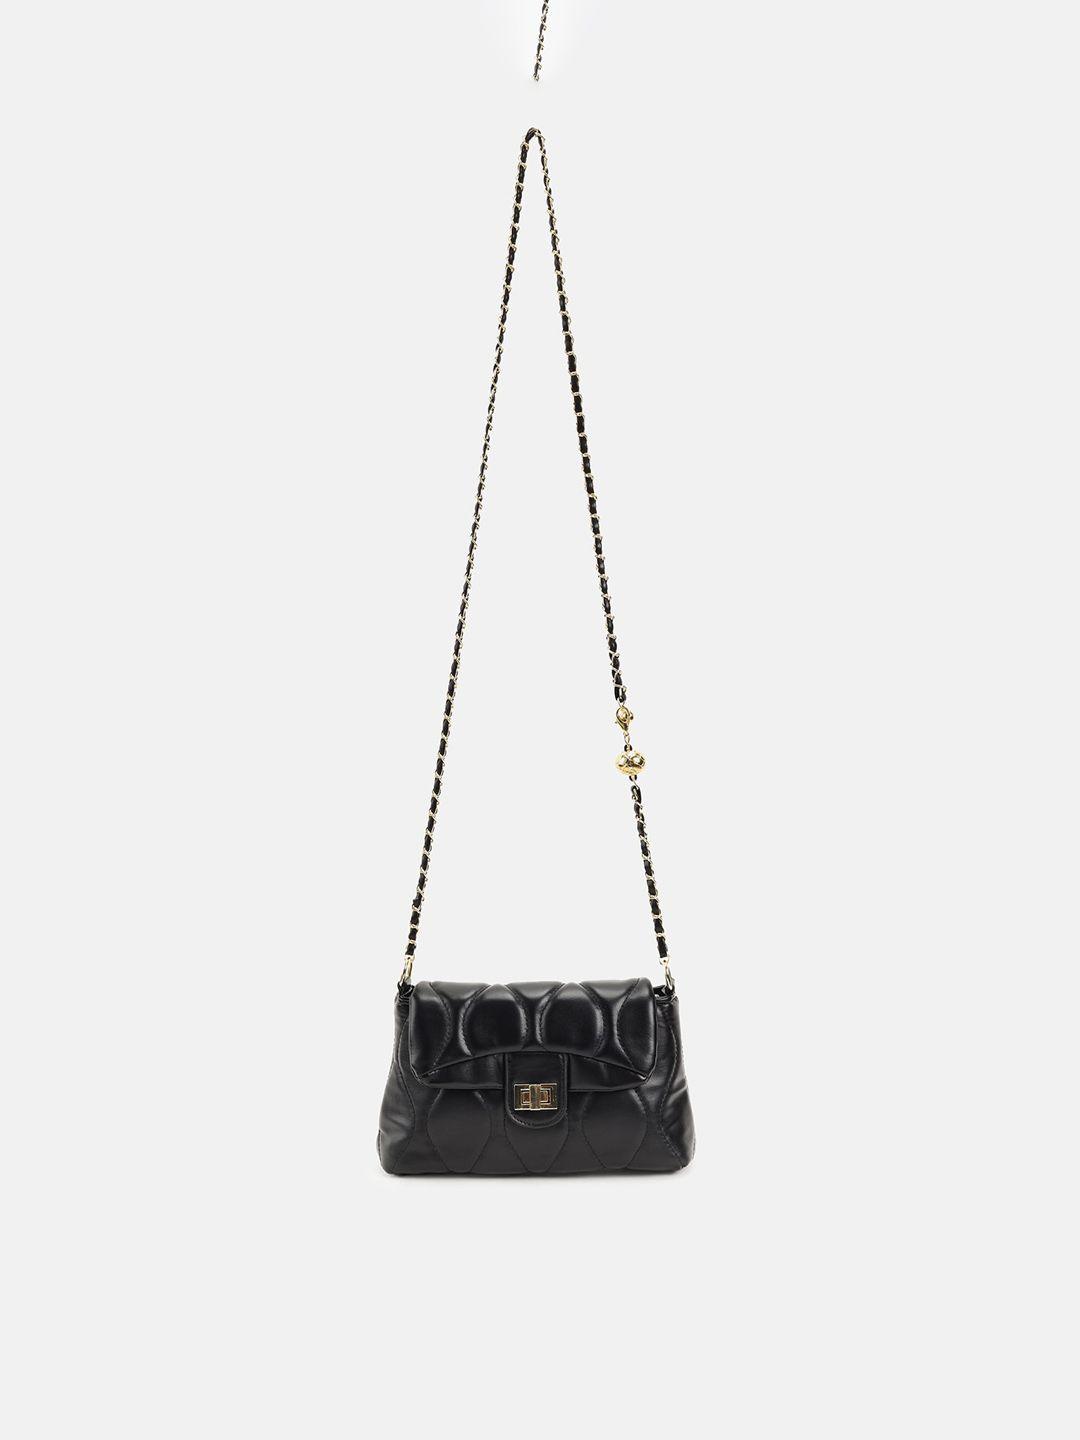 kazo black structured sling bag with quilted